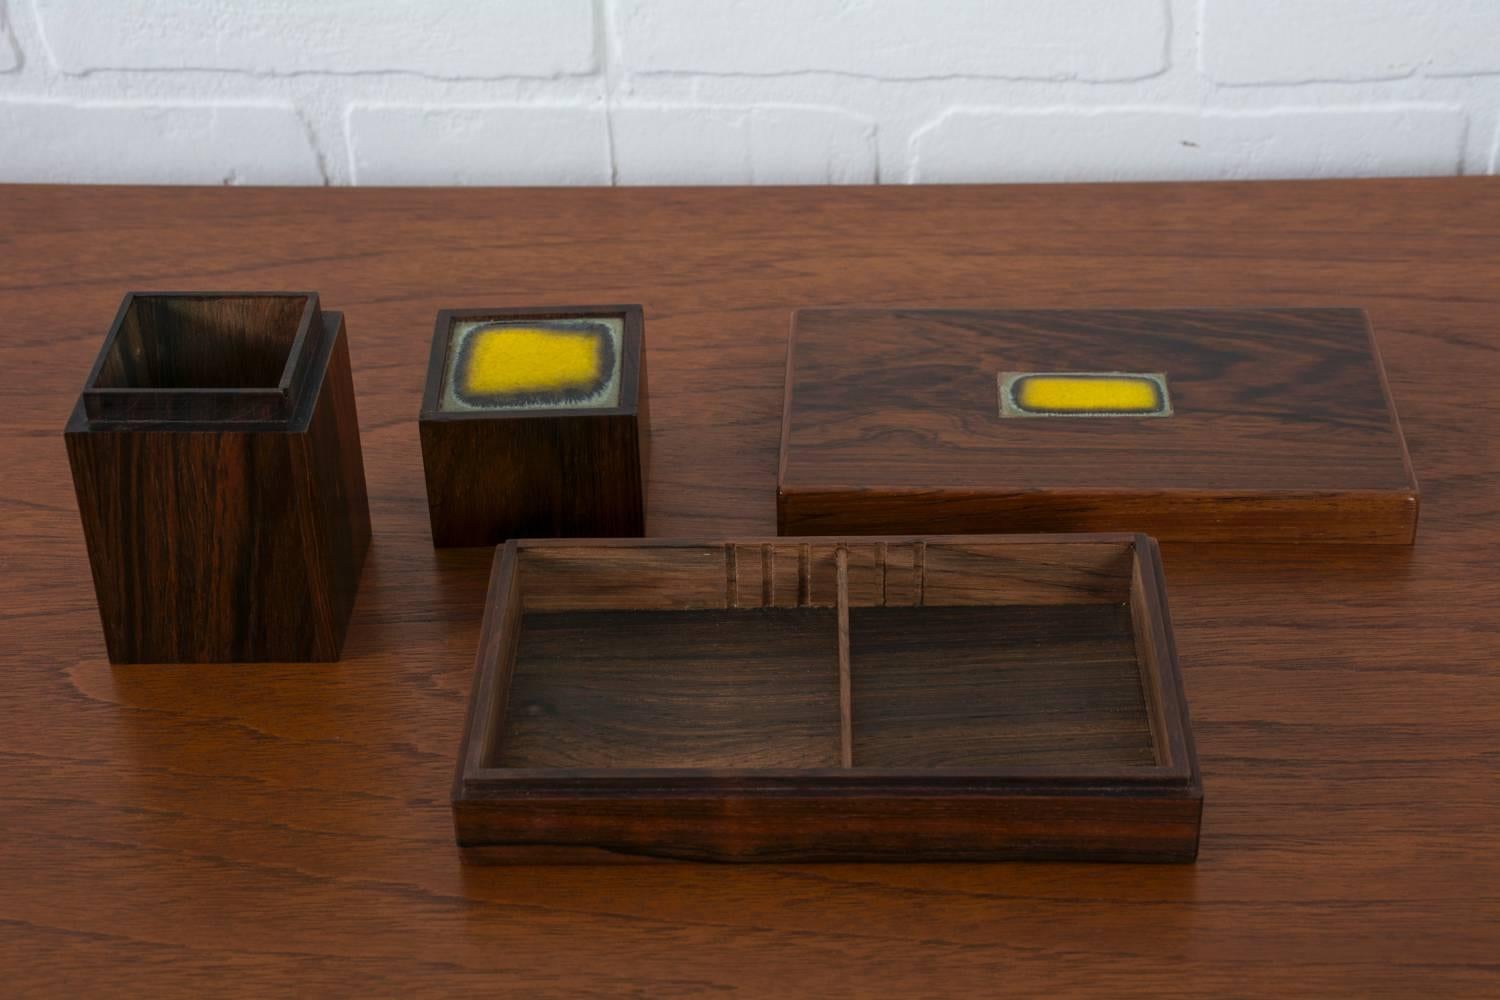 This set of two vintage Mid-Century solid rosewood boxes was designed by Bodil Eje for Alfred Klitgaard in the 1950s, Denmark. They each have a yellow ceramic tile inset in the lid. The flat box has an adjustable divider. Both boxes are stamped